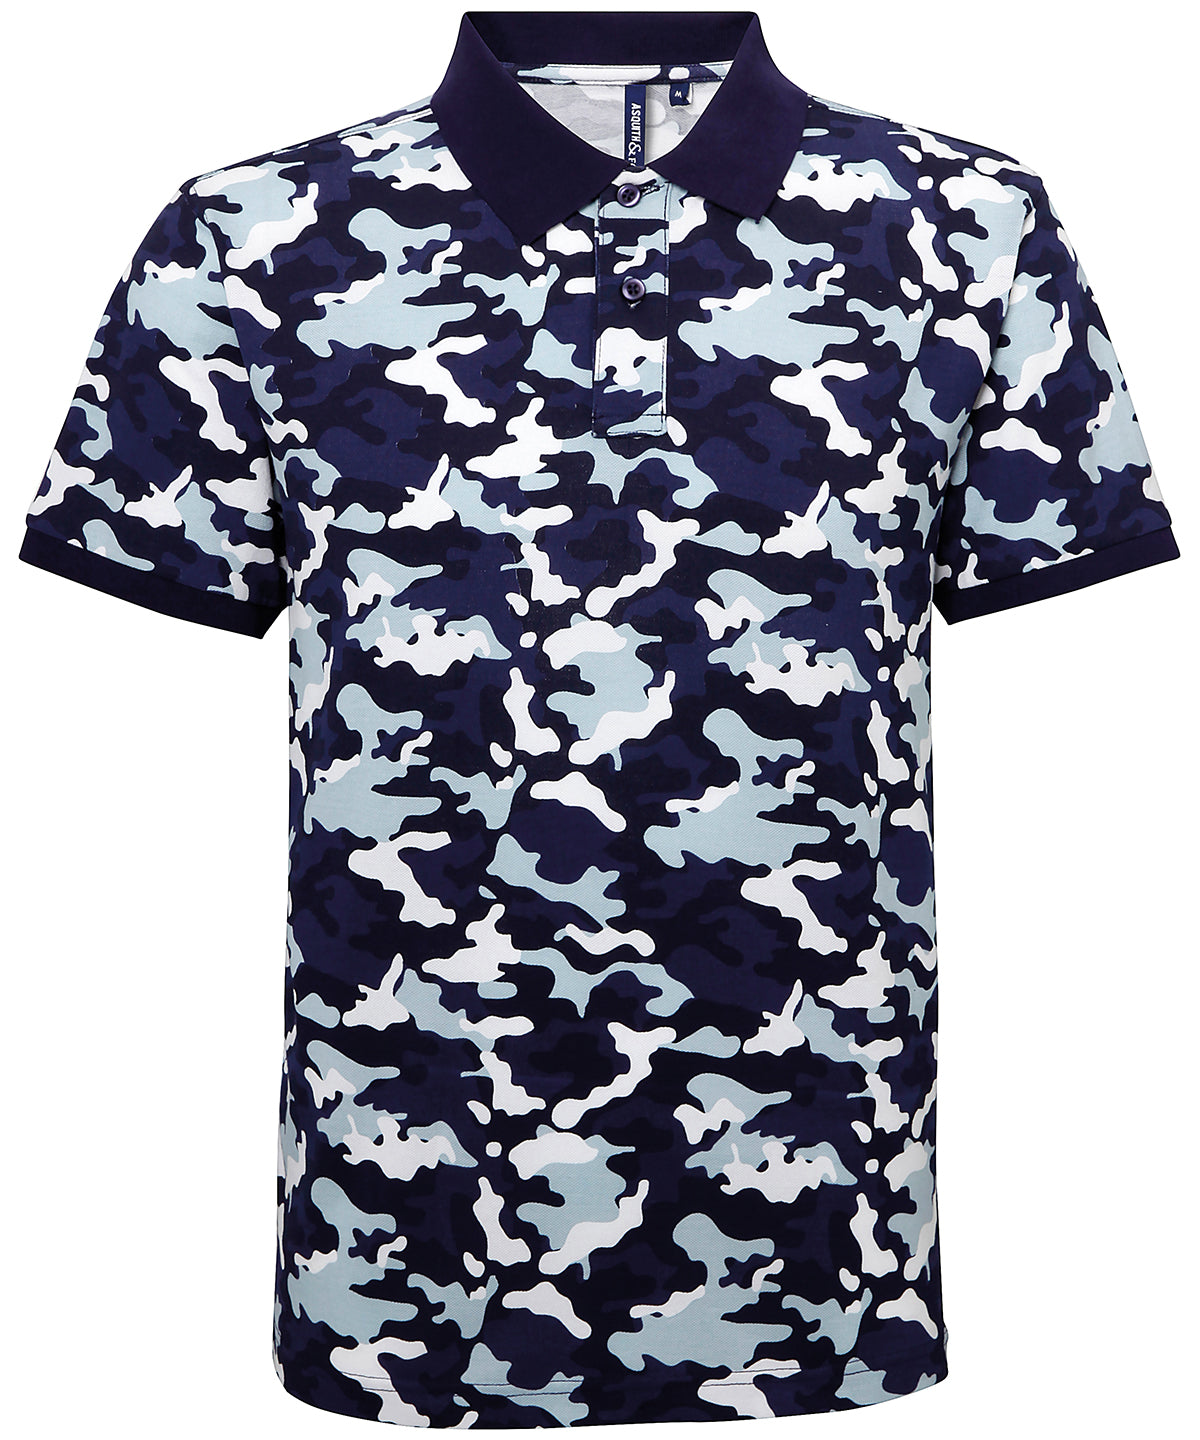 Personalised Polo Shirts - Camouflage Asquith & Fox Men's camo piqué polo